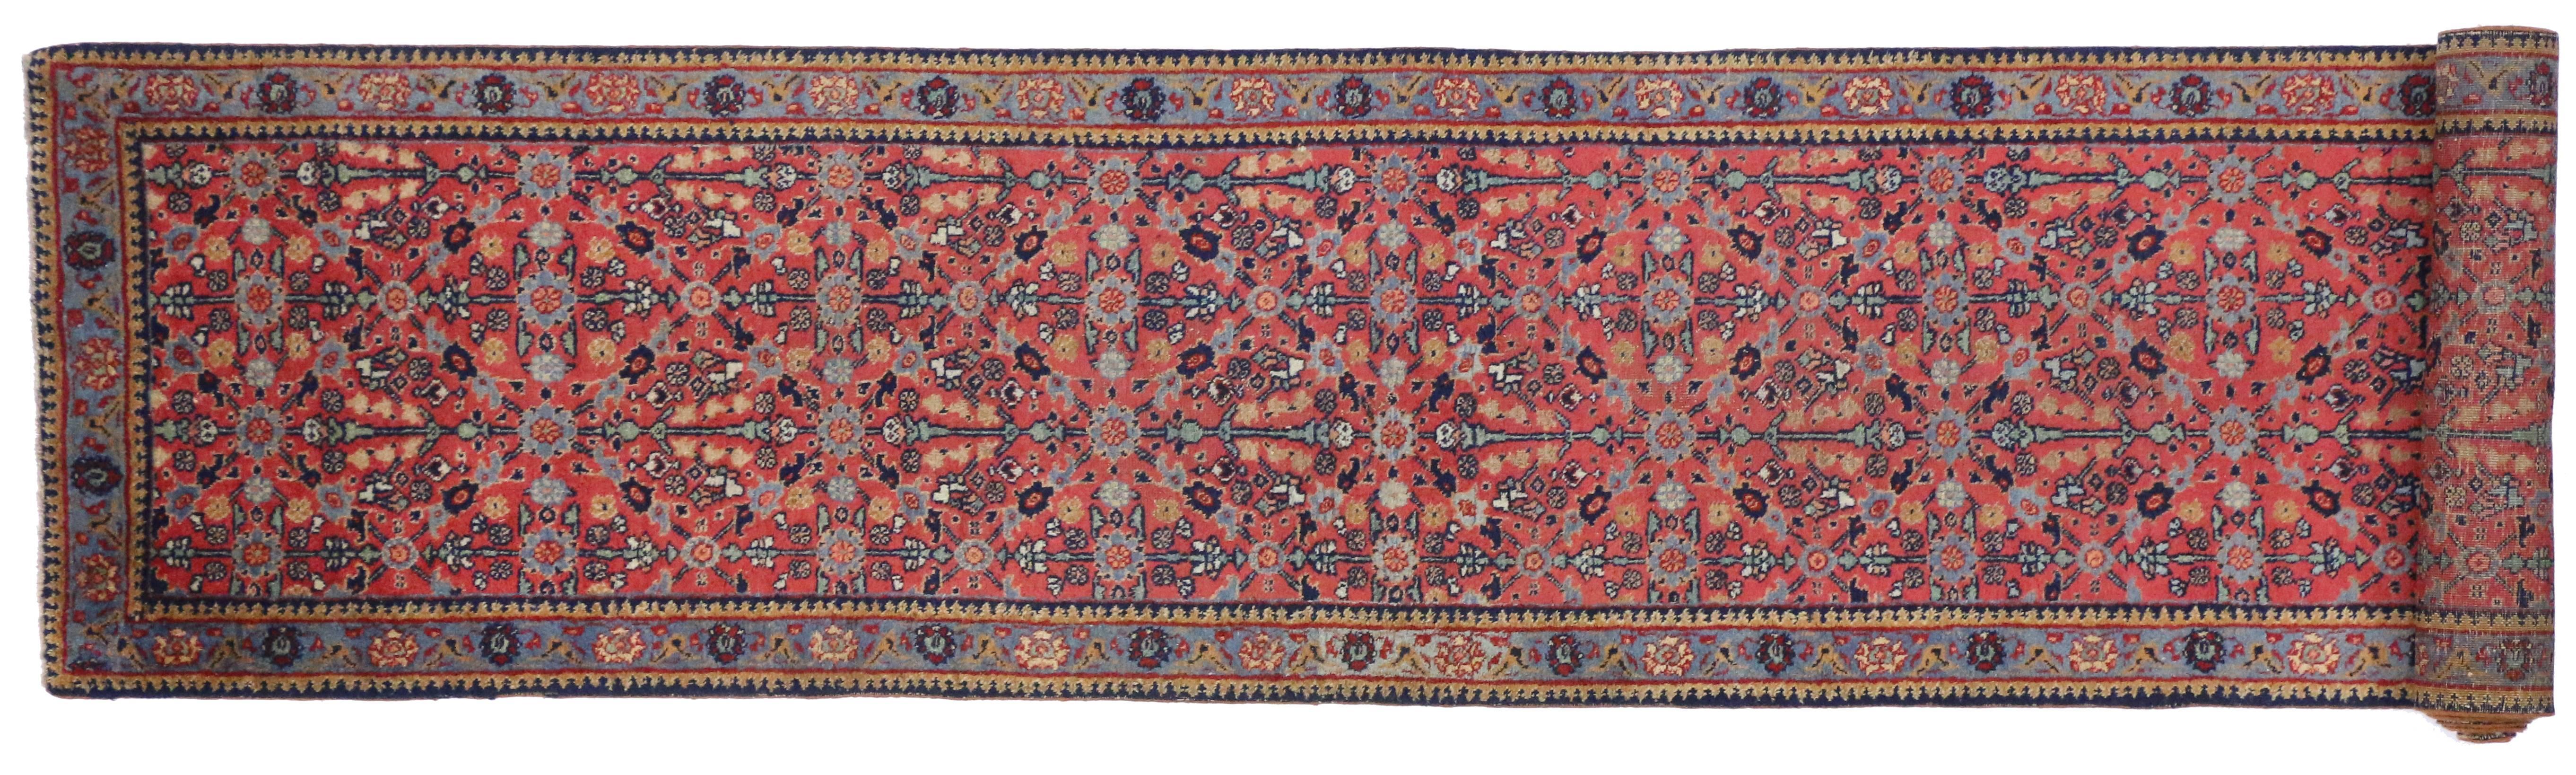 Antique Persian Tabriz Carpet Runner with Modern Traditional Style 2